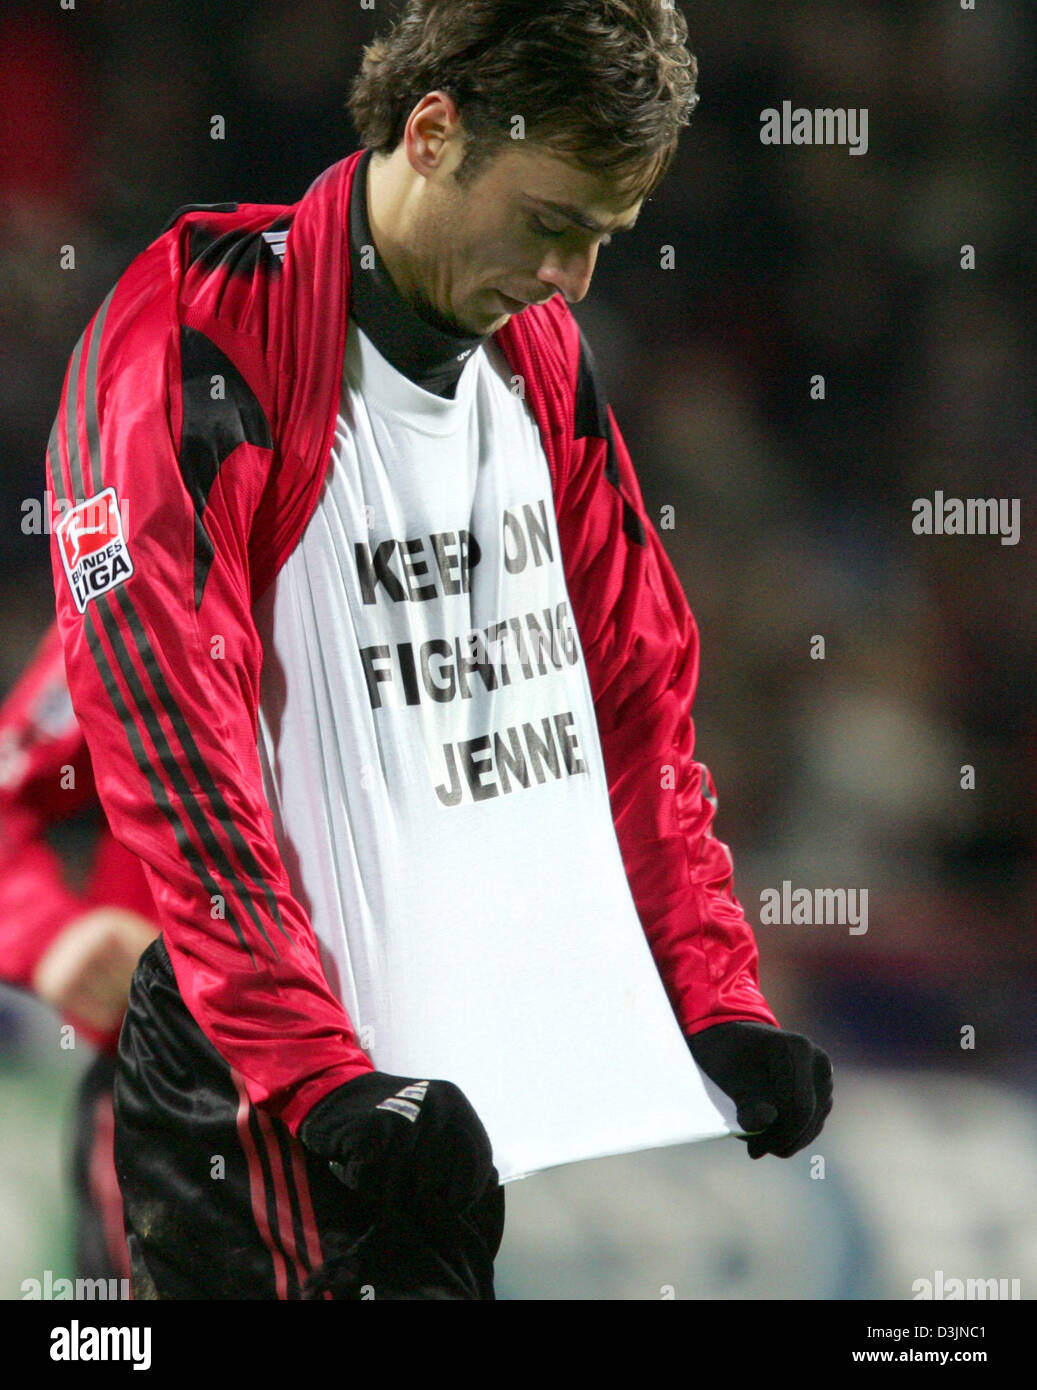 (dpa) -  Leverkusen's goal scorer Dimitar Berbatov, who scored the 1-0 lead goal, presents his t-shirt which reads 'Keep On Fighting Jenne' in the Bundesliga soccer game between Bayer 04 Leverkusen and VfB Stuttgart in Leverkusen, Germany, 27 February 2005. The game ended in a 1-1 draw. Stock Photo